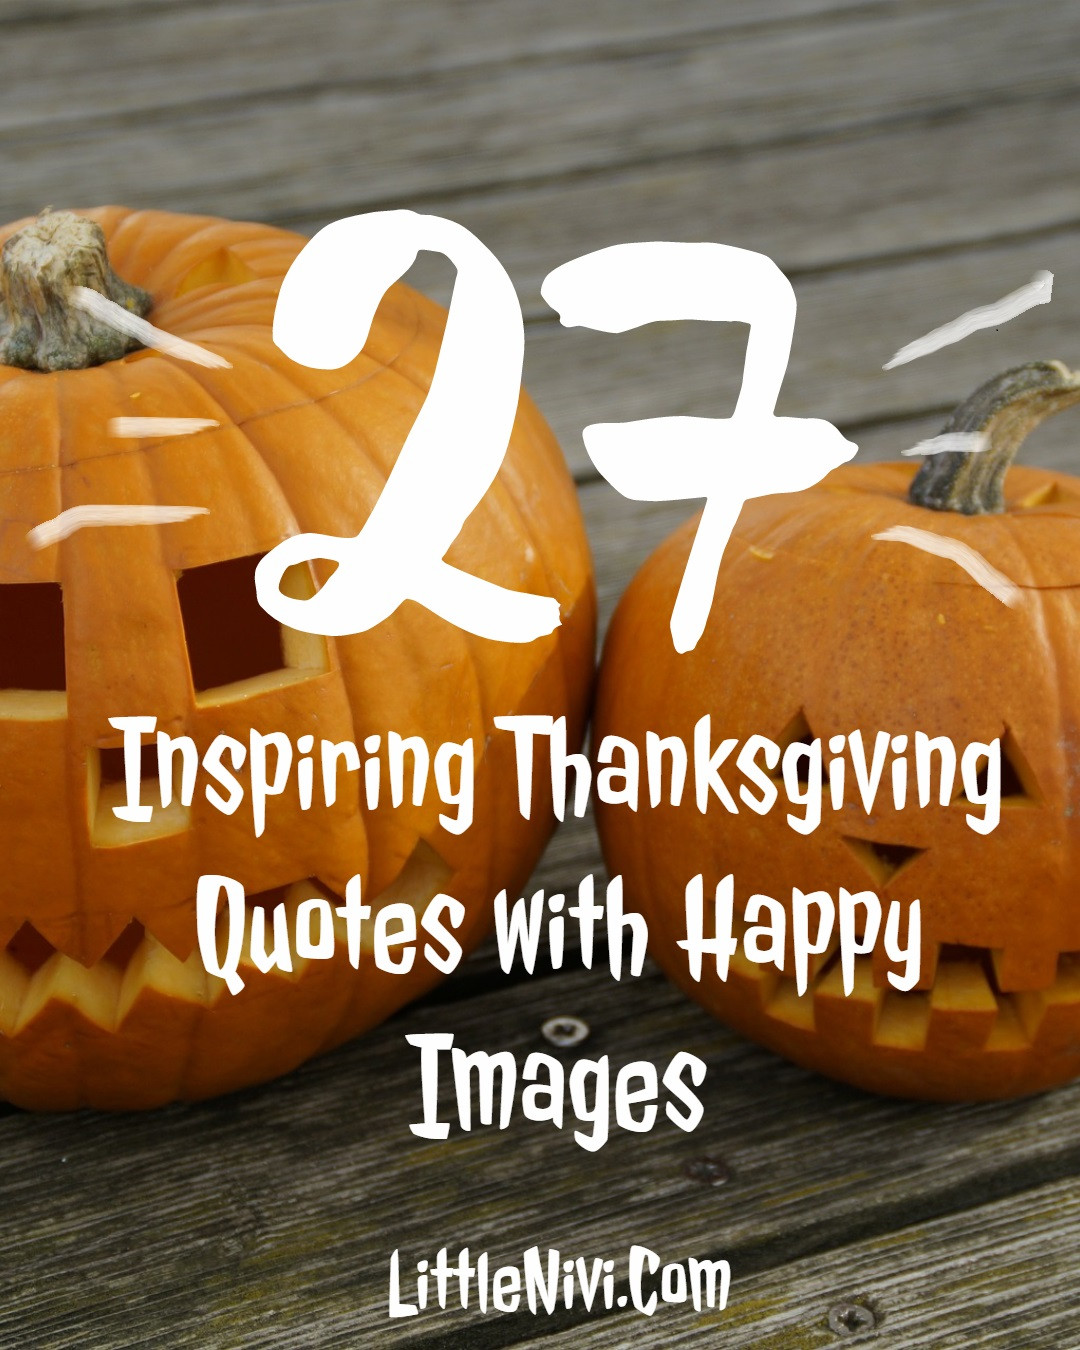 Thanksgiving Quotes For Him
 27 Inspiring Thanksgiving Quotes with Happy